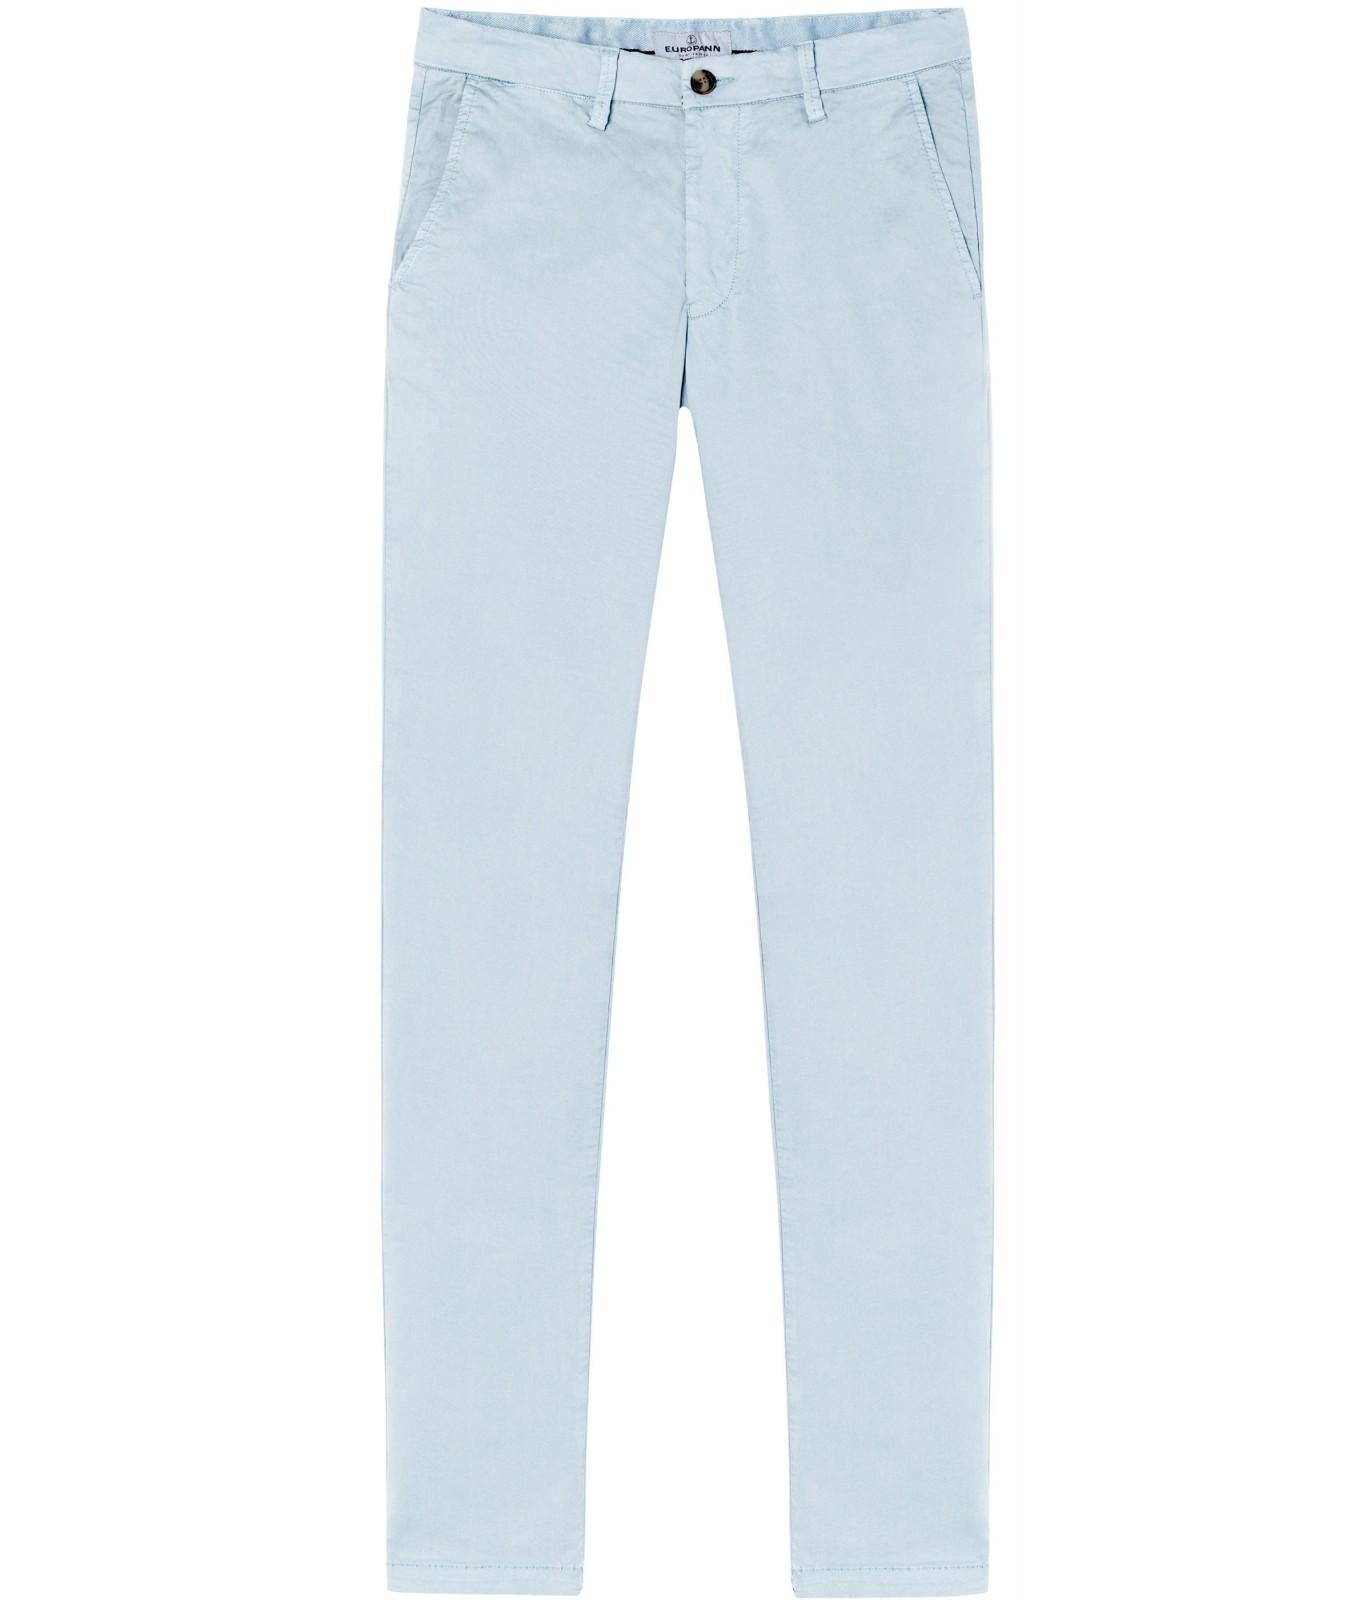 Men's Blue Pleated Chino Trousers | Peter Christian